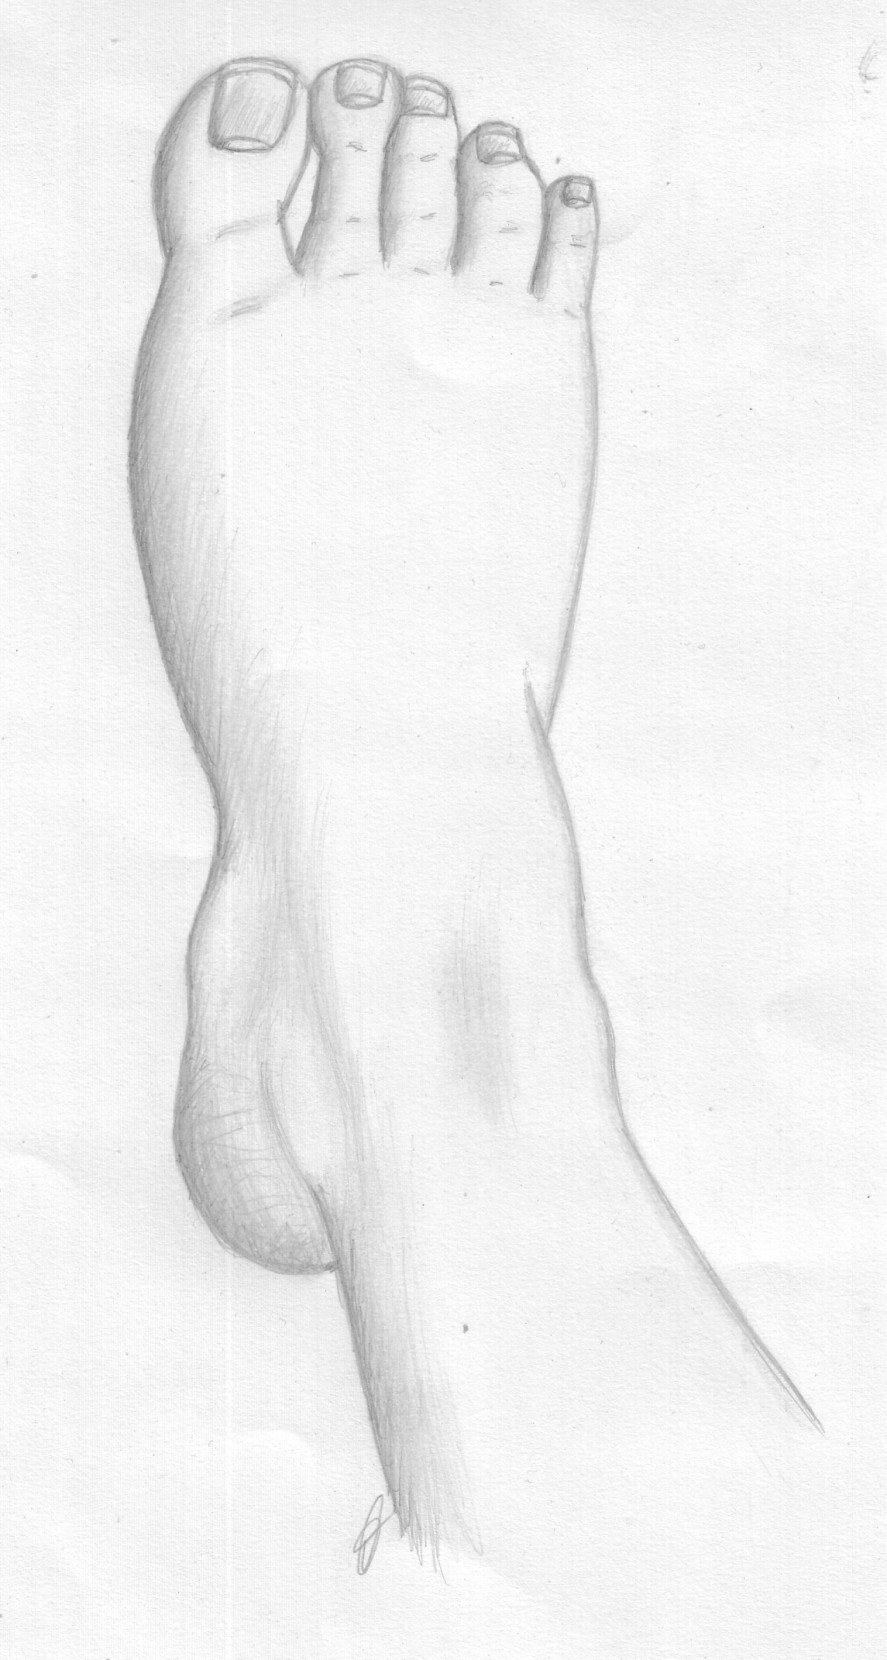 Third place foot